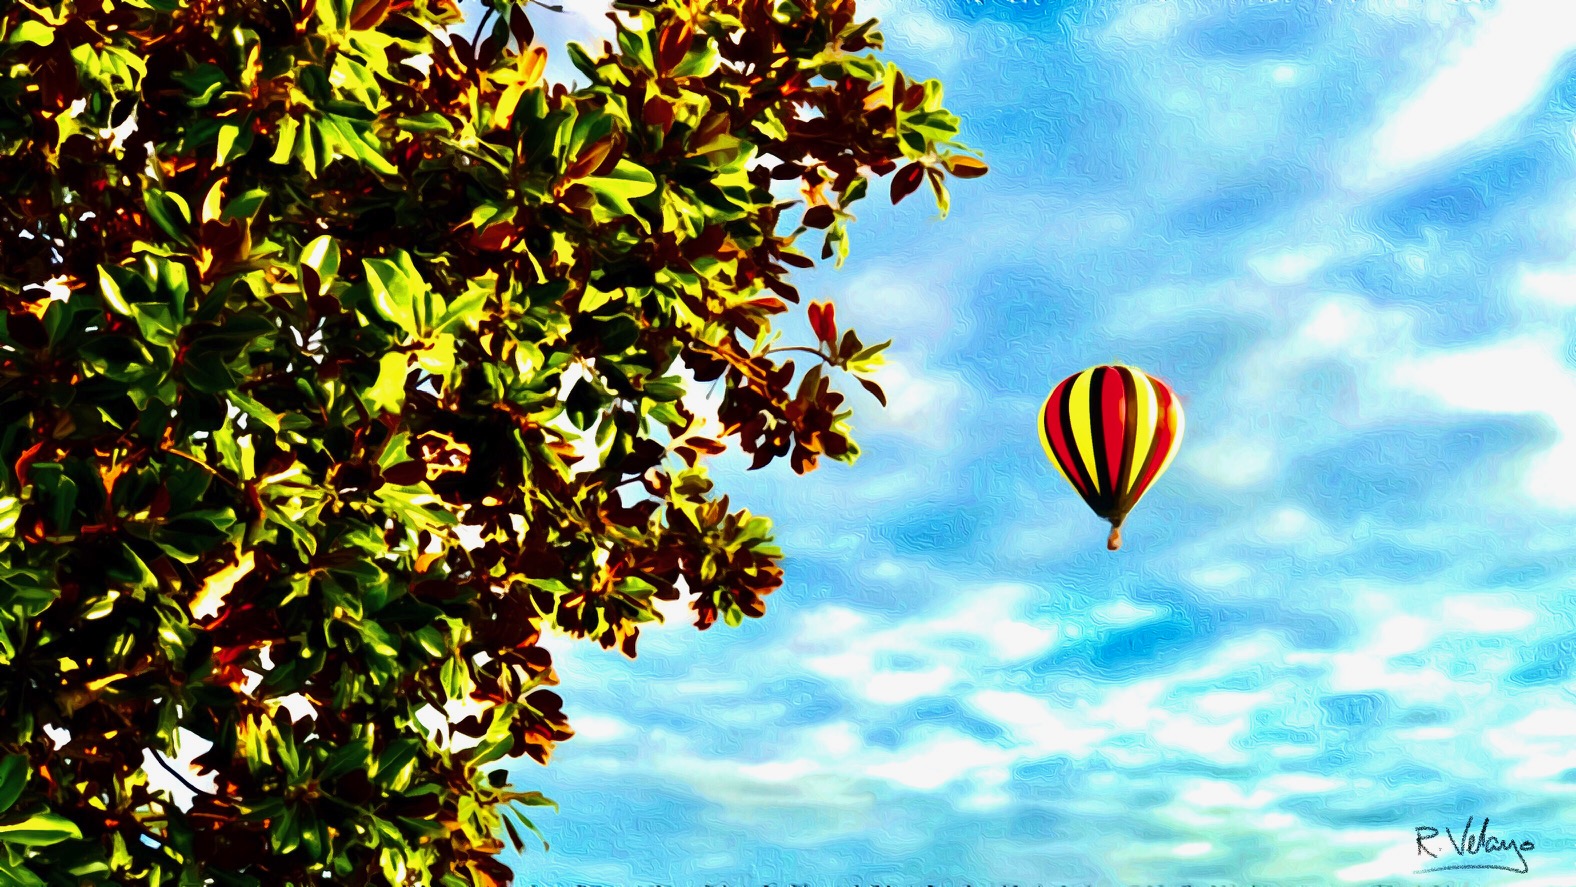 "STRIPED YELLOW AND RED HOT AIR BALLOON ABOVE BAHAMA BAY RESORT" [Created: 11/04/2021]